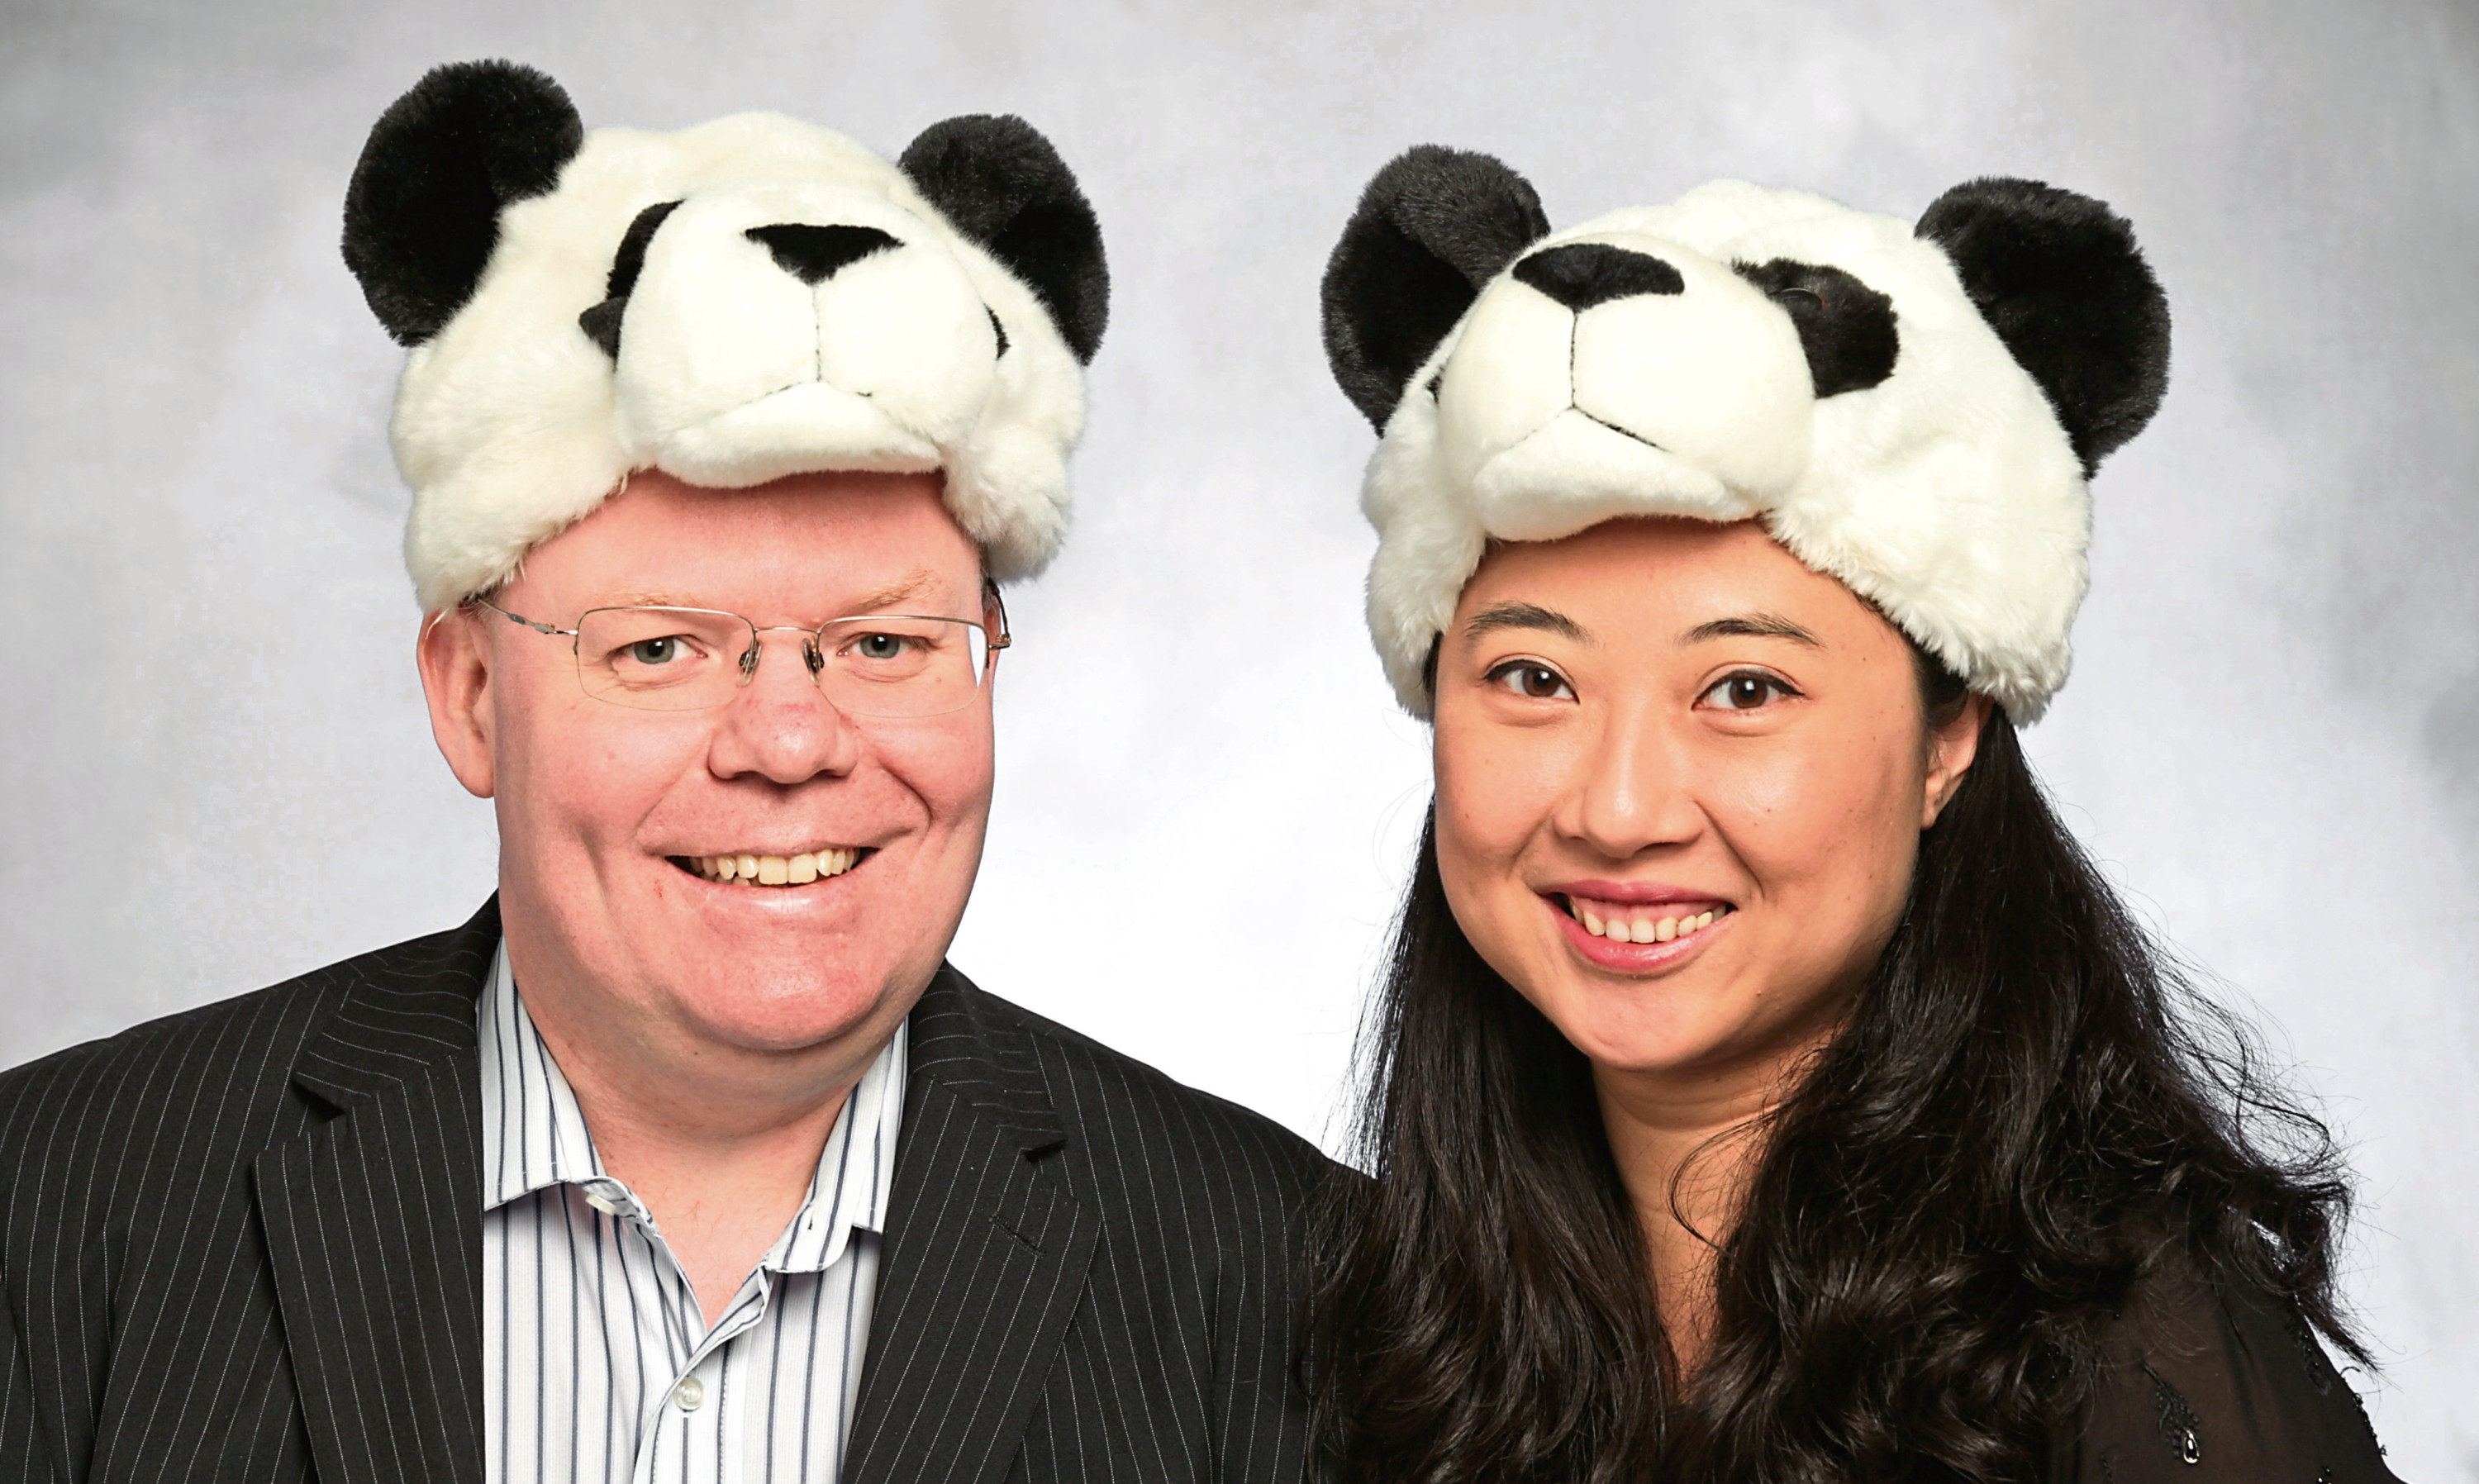 Chris Forbes and wife Julie Chen of Cheeky Panda